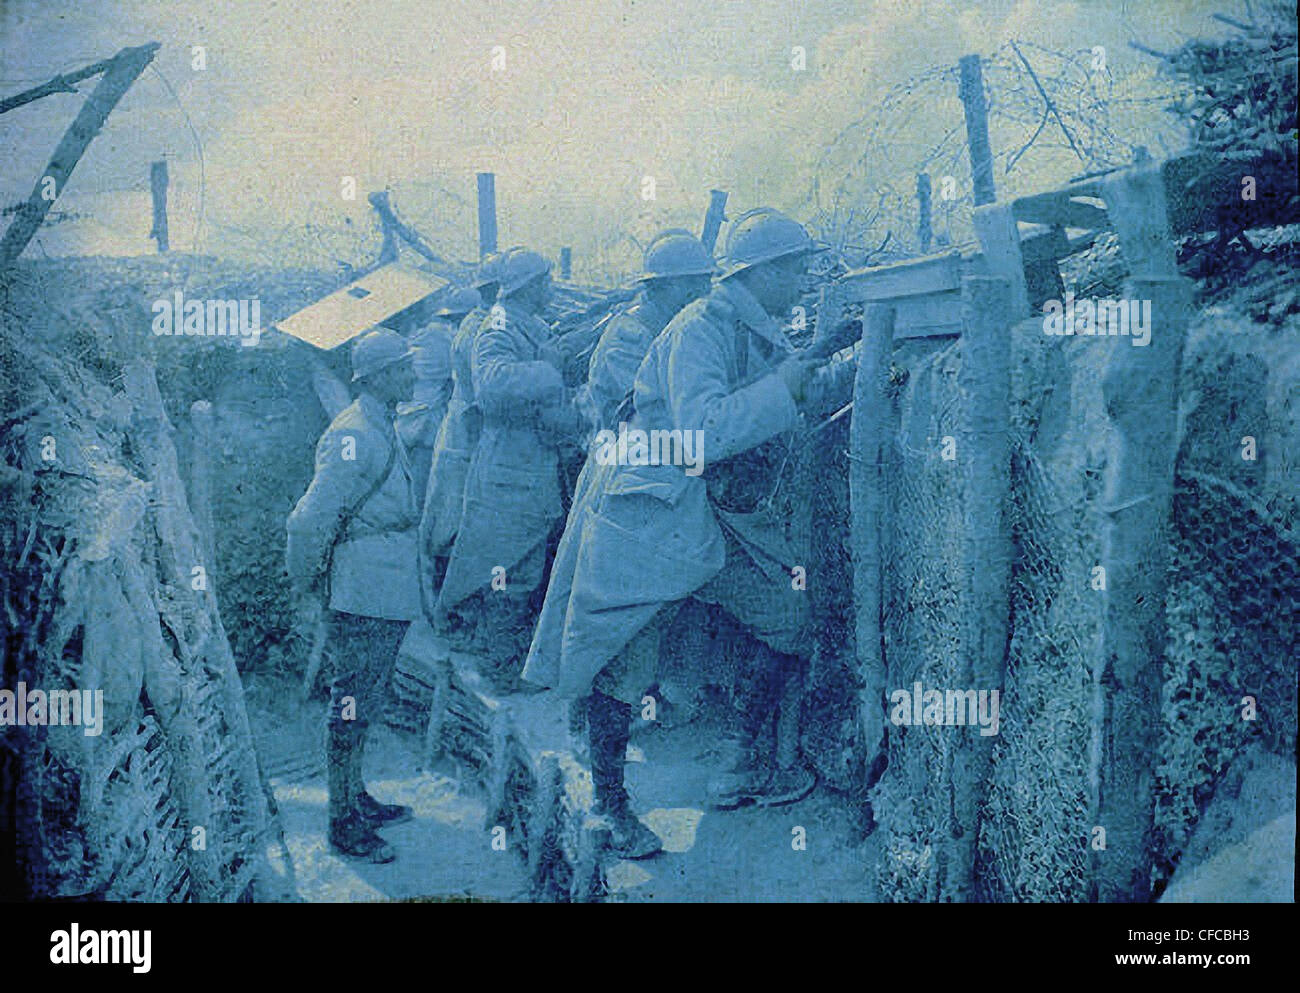 French, Listening Post, Soldiers, trench, Western Front, World War I, War, World War, Europe, 1914-1918, France, 1916, Autochrom Stock Photo